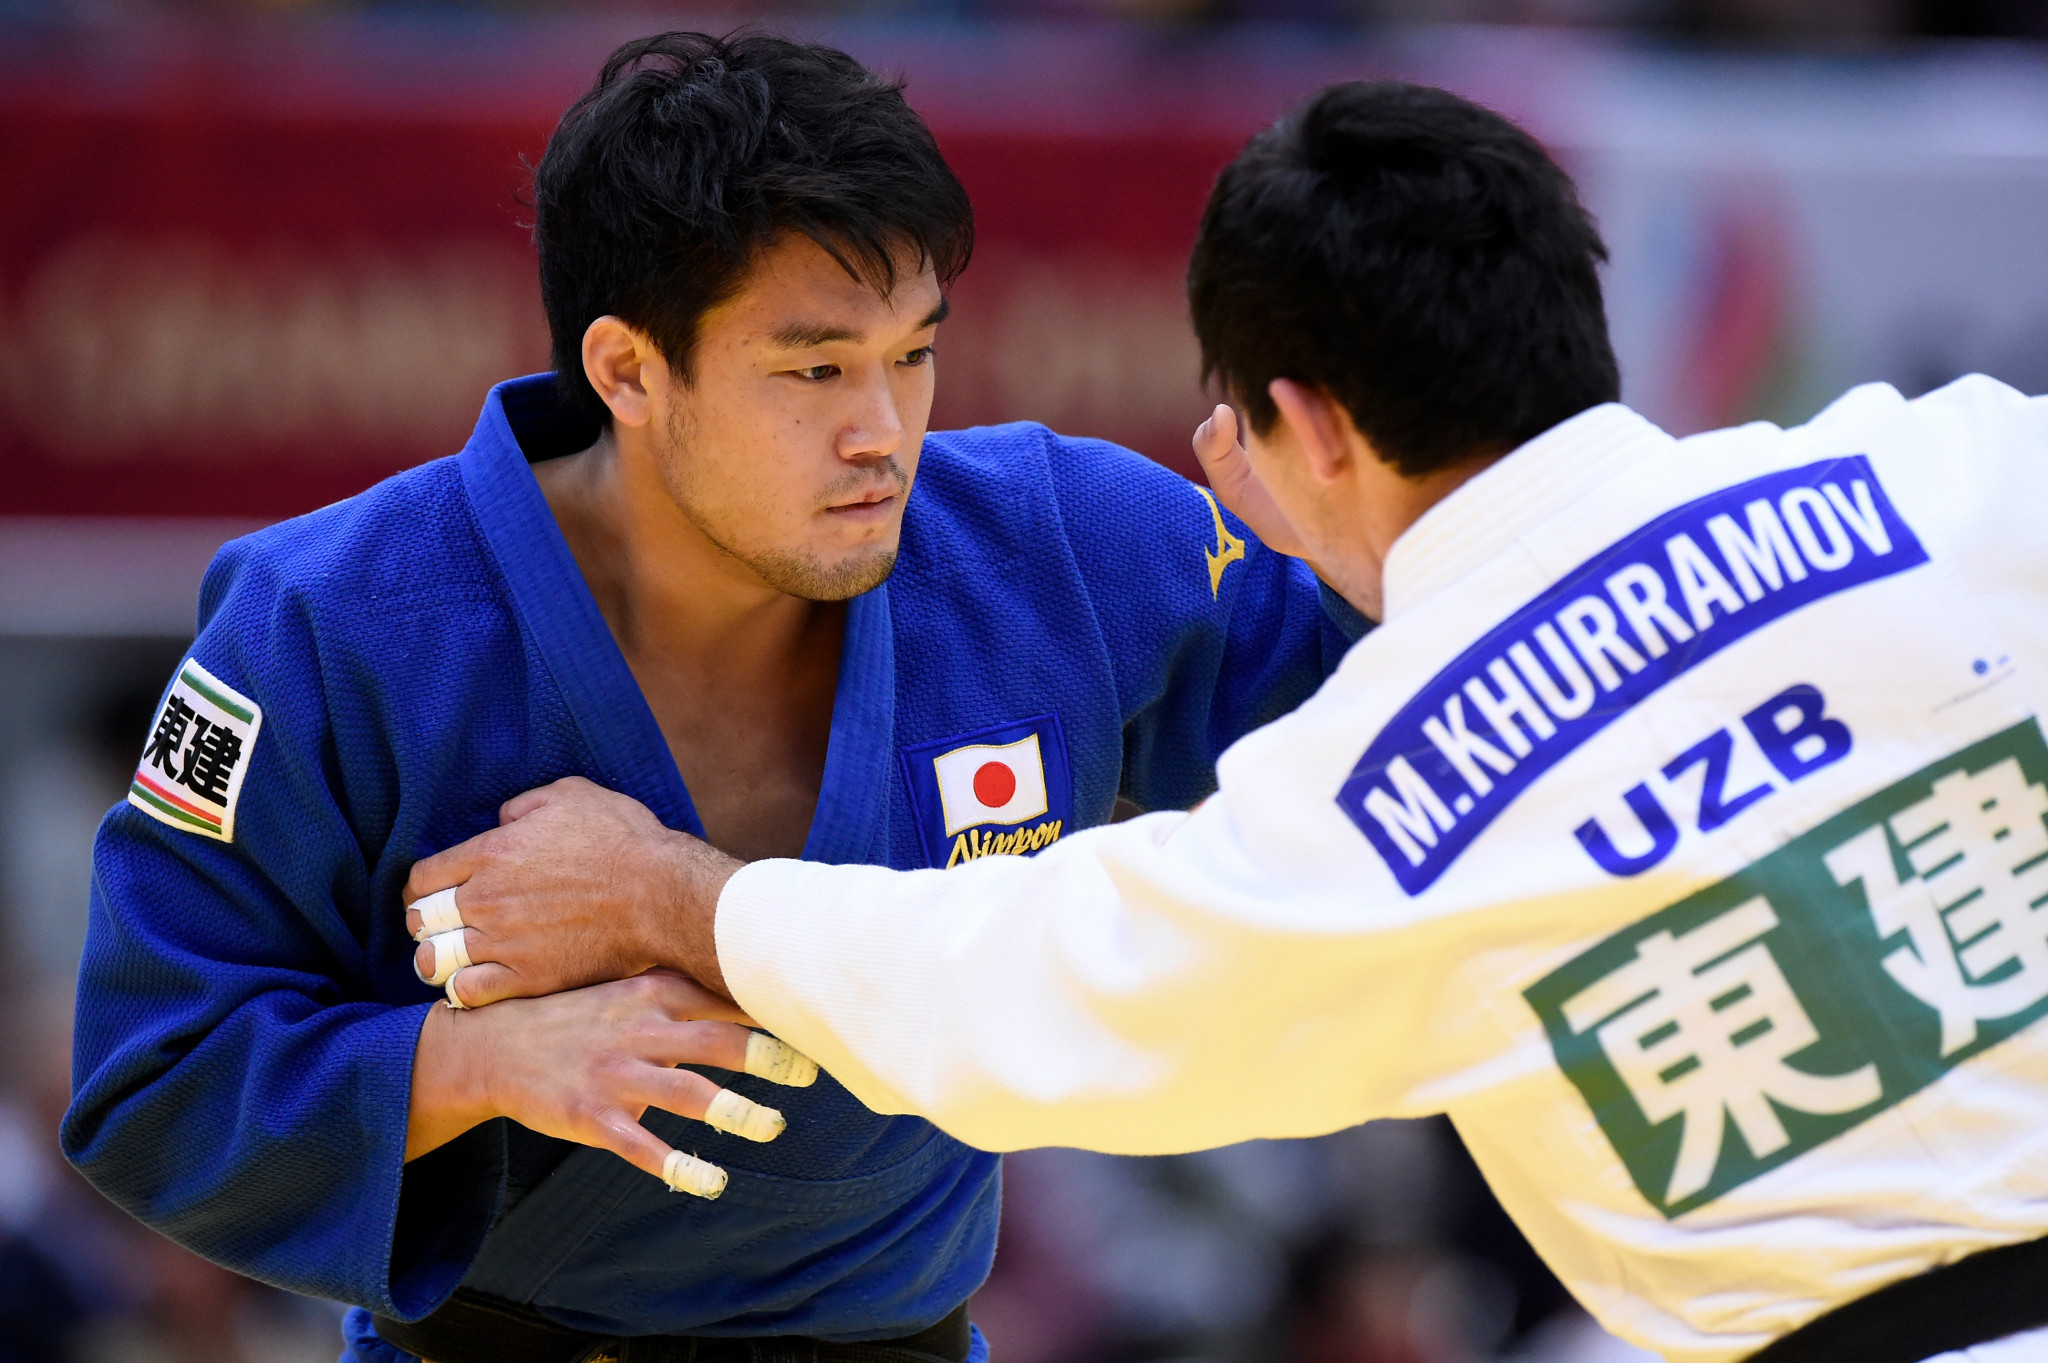 Uzbekistan is a major judo power and hosts a Grand Prix event in Tashkent ©Getty Images